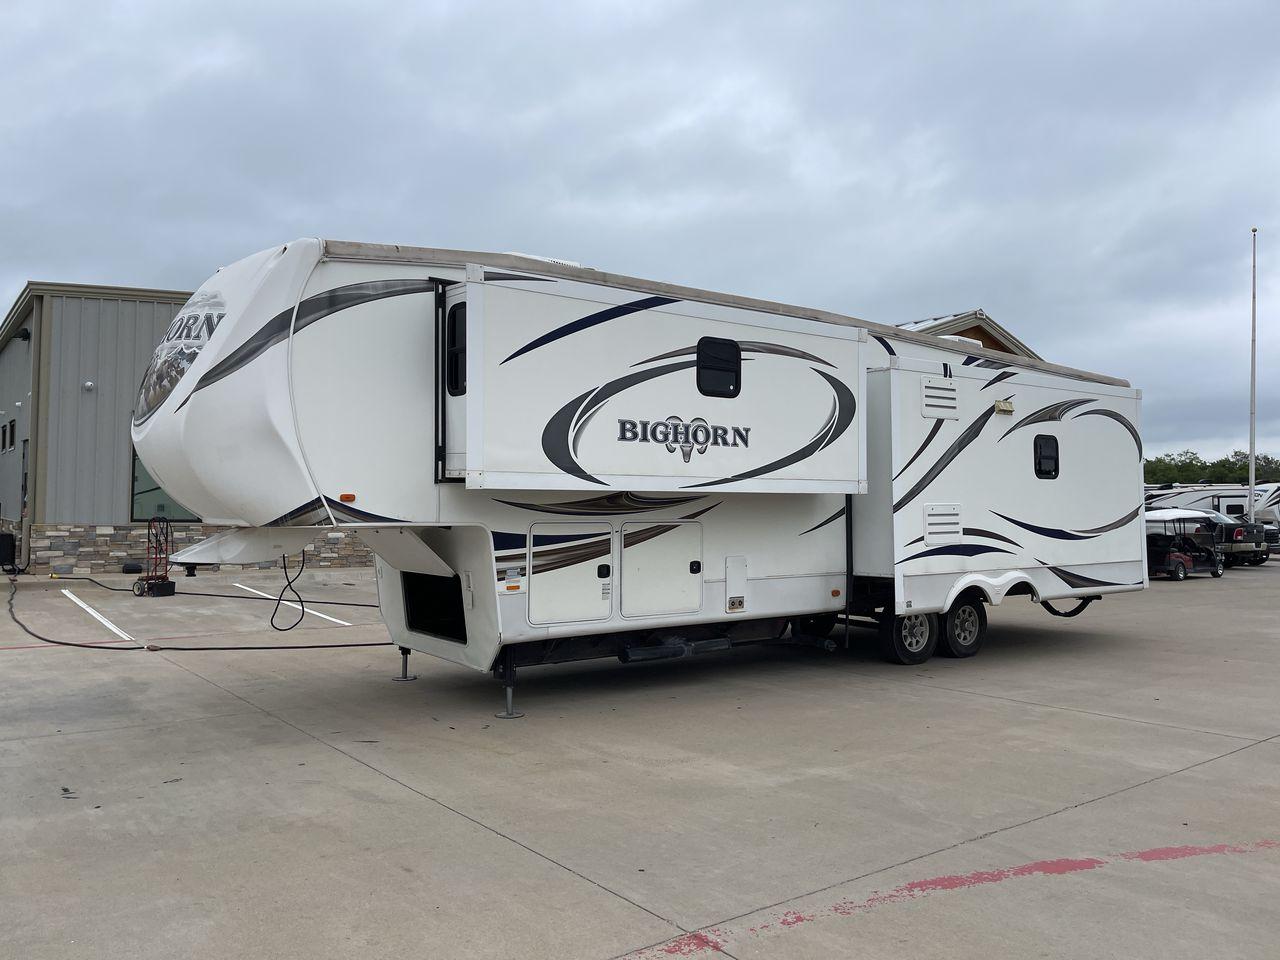 2013 WHITE HEARTLAND BIGHORN 3585RL - (5SFBG3826DE) , Length: 38.25 ft. | Dry Weight: 12,018 lbs. | Gross Weight: 15,500 lbs. | Slides: 3 transmission, located at 4319 N Main St, Cleburne, TX, 76033, (817) 678-5133, 32.385960, -97.391212 - The 2013 Heartland Big Horn 3585RL is a triple-slide fifth wheel measuring 38.25 ft. in length and crafted with aluminum and fiberglass, ensuring durability and longevity. With a dry weight of 12,018 lbs. and a GVWR of 15,500 lbs., this impressive model offers both practicality and versatility. The - Photo #23